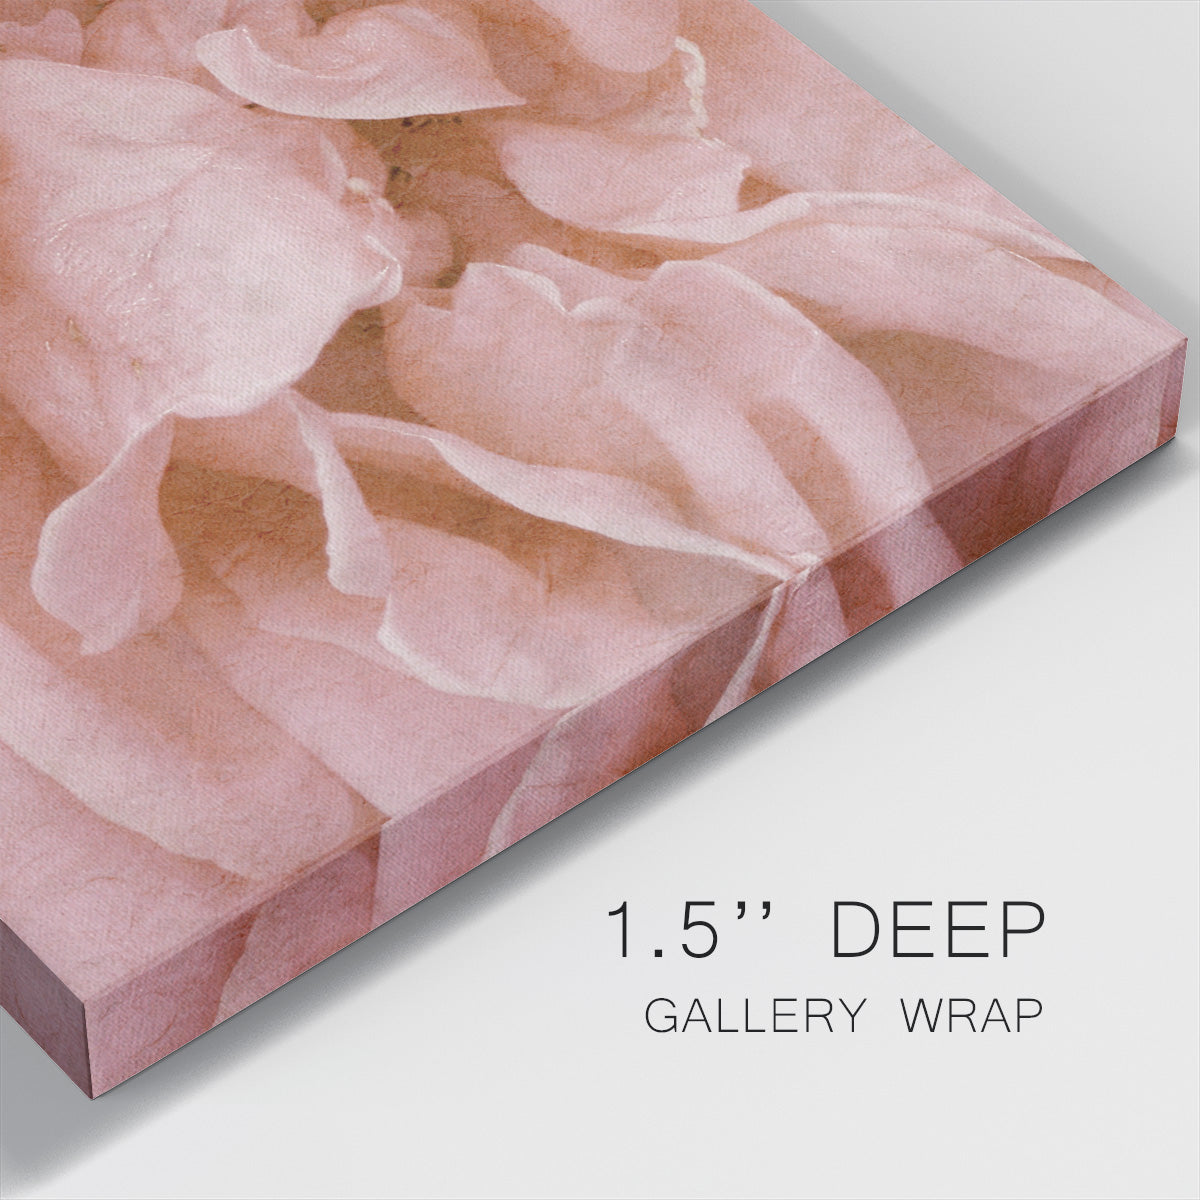 Wall Flower IV-Premium Gallery Wrapped Canvas - Ready to Hang